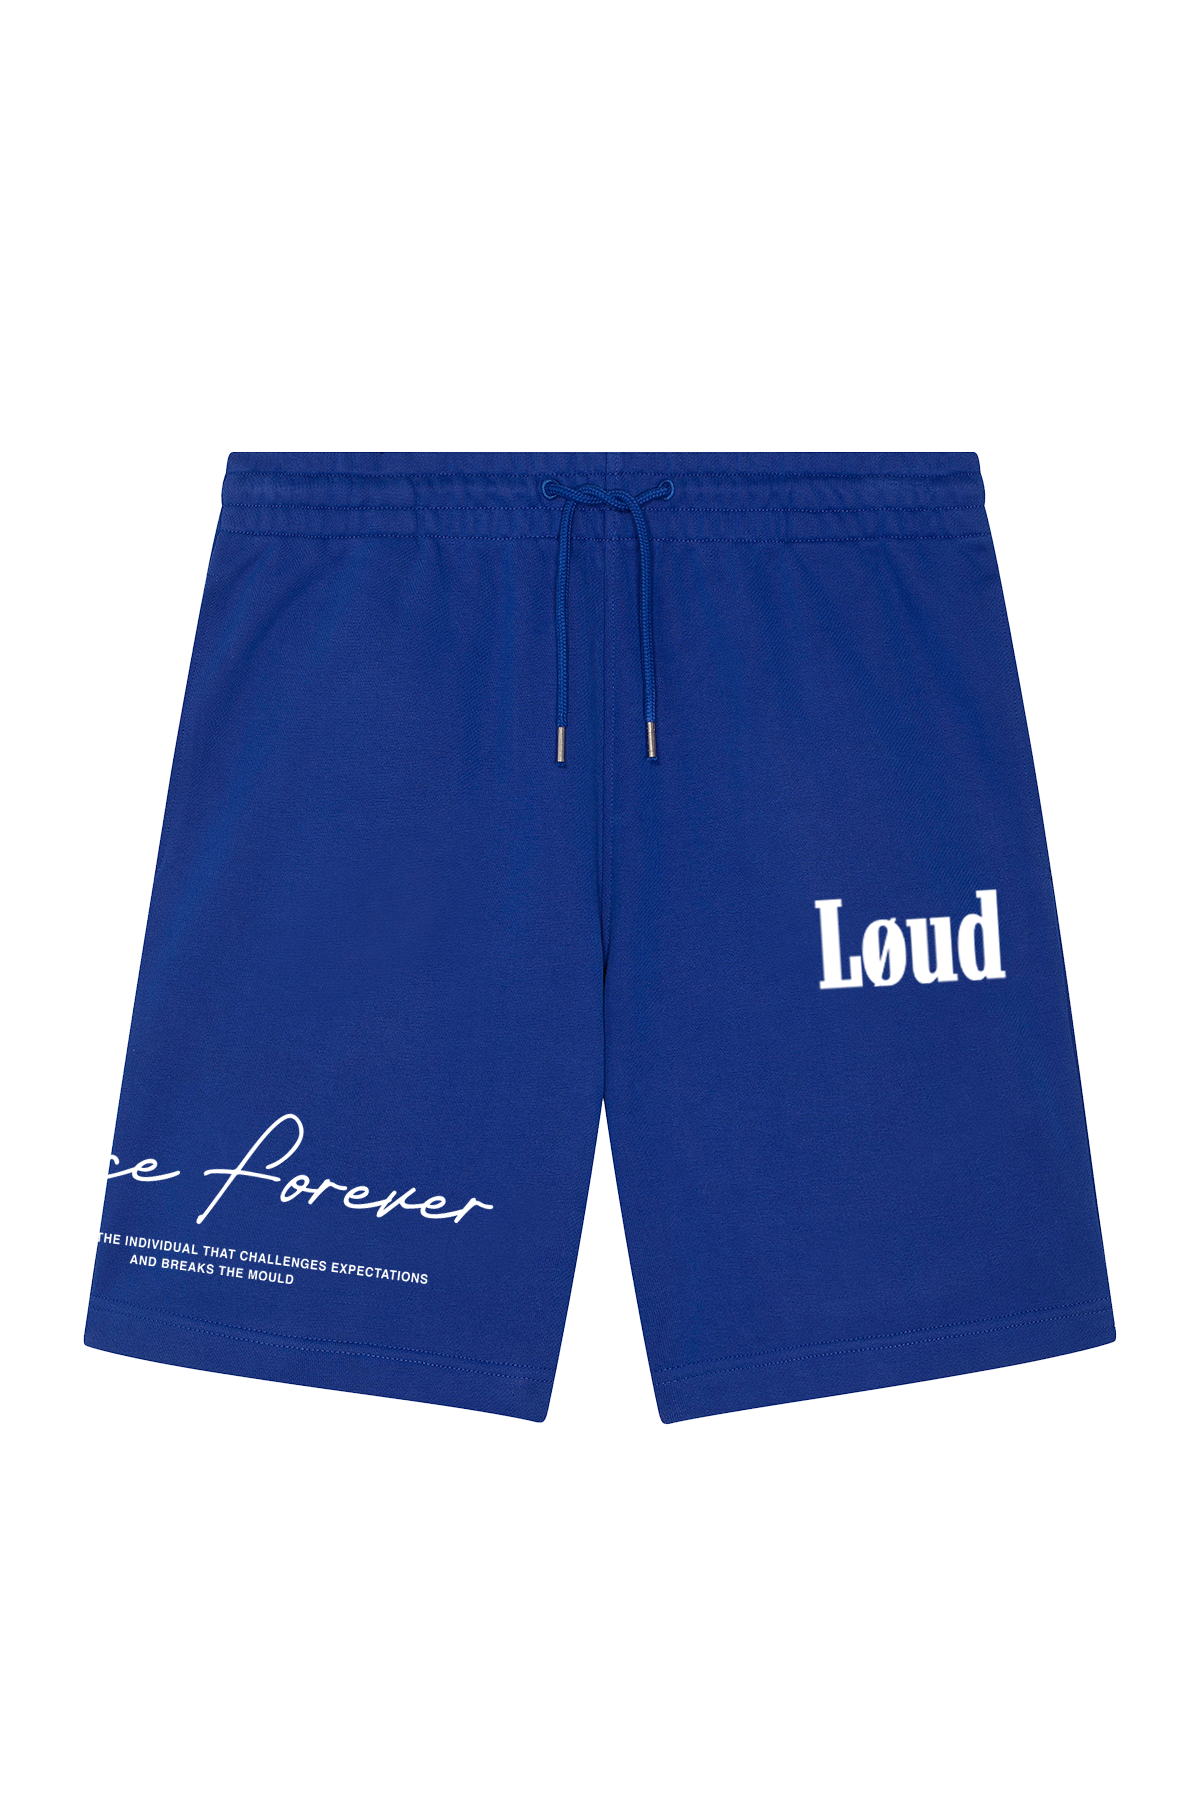 Since Forever Shorts - Blue